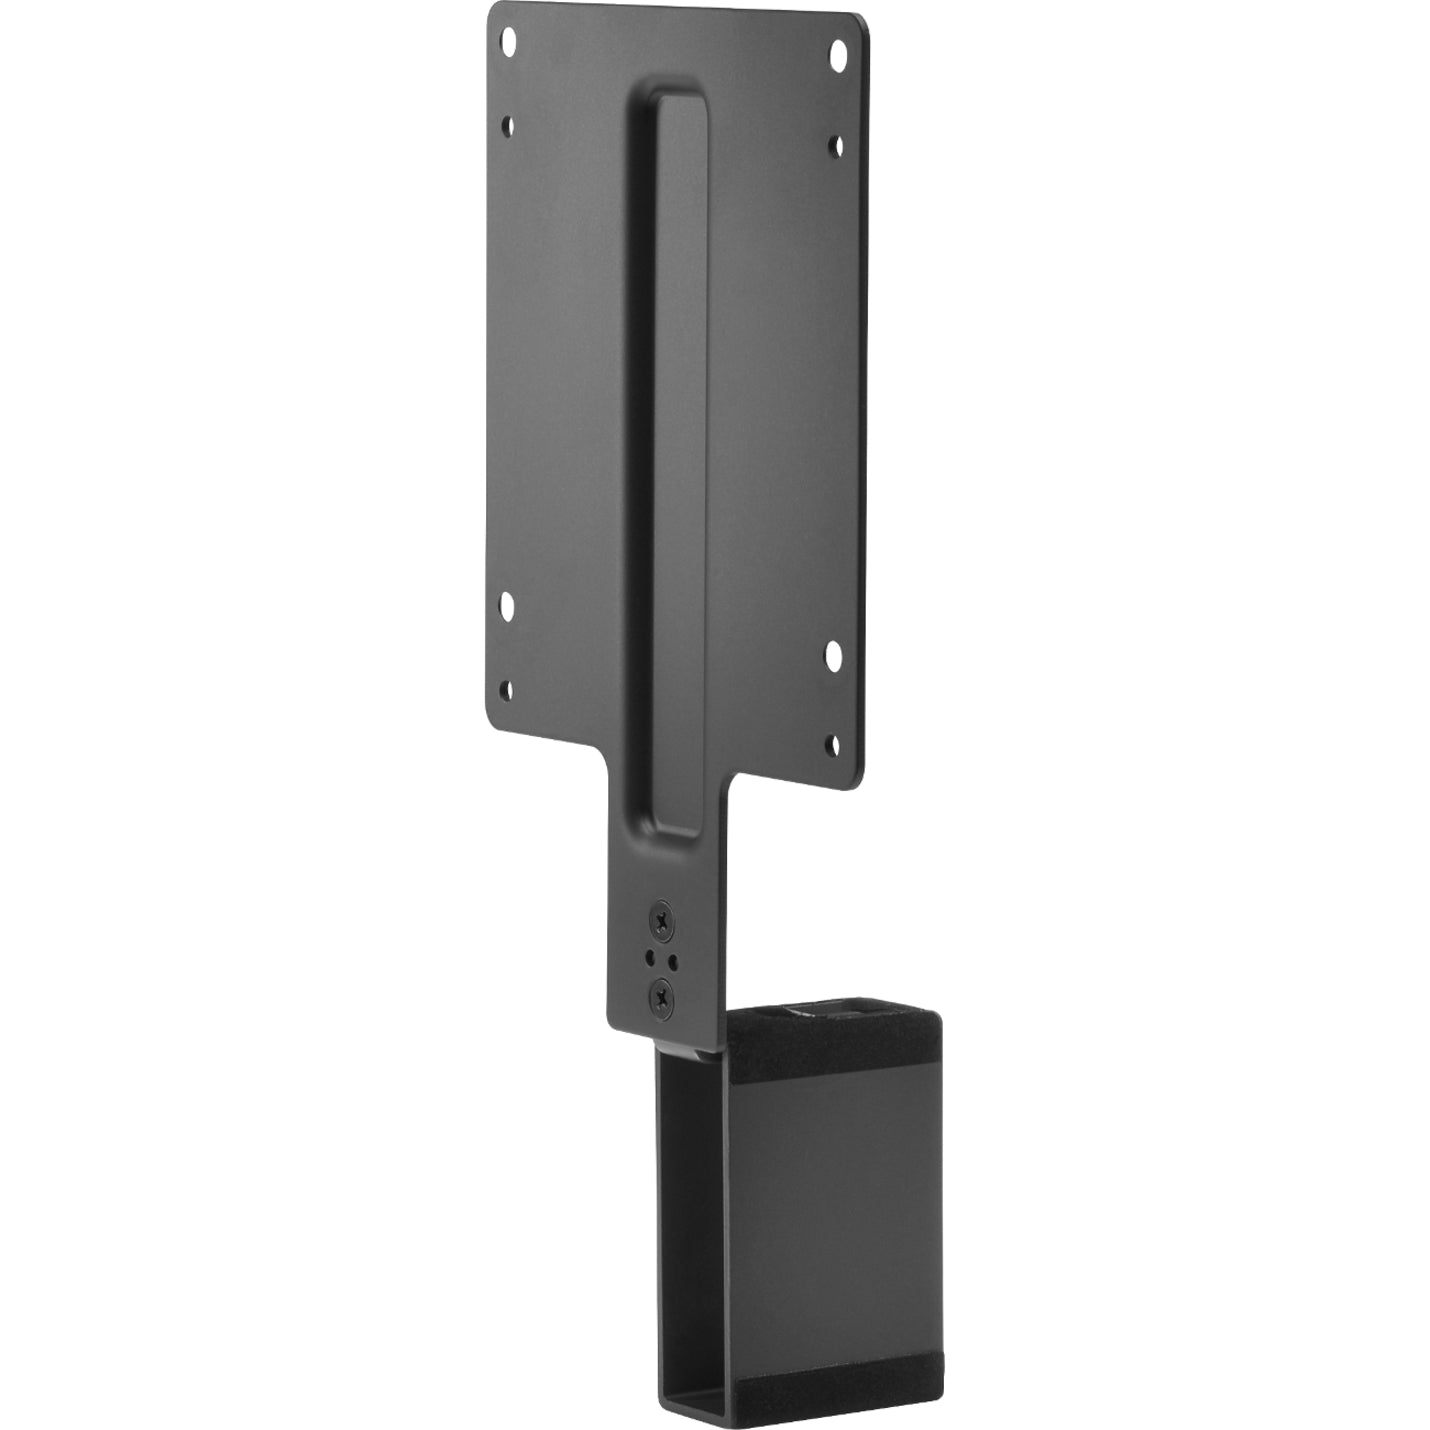 HP 2DW53AA B300 PC Mounting Bracket for Computer, Thin Client, Workstation